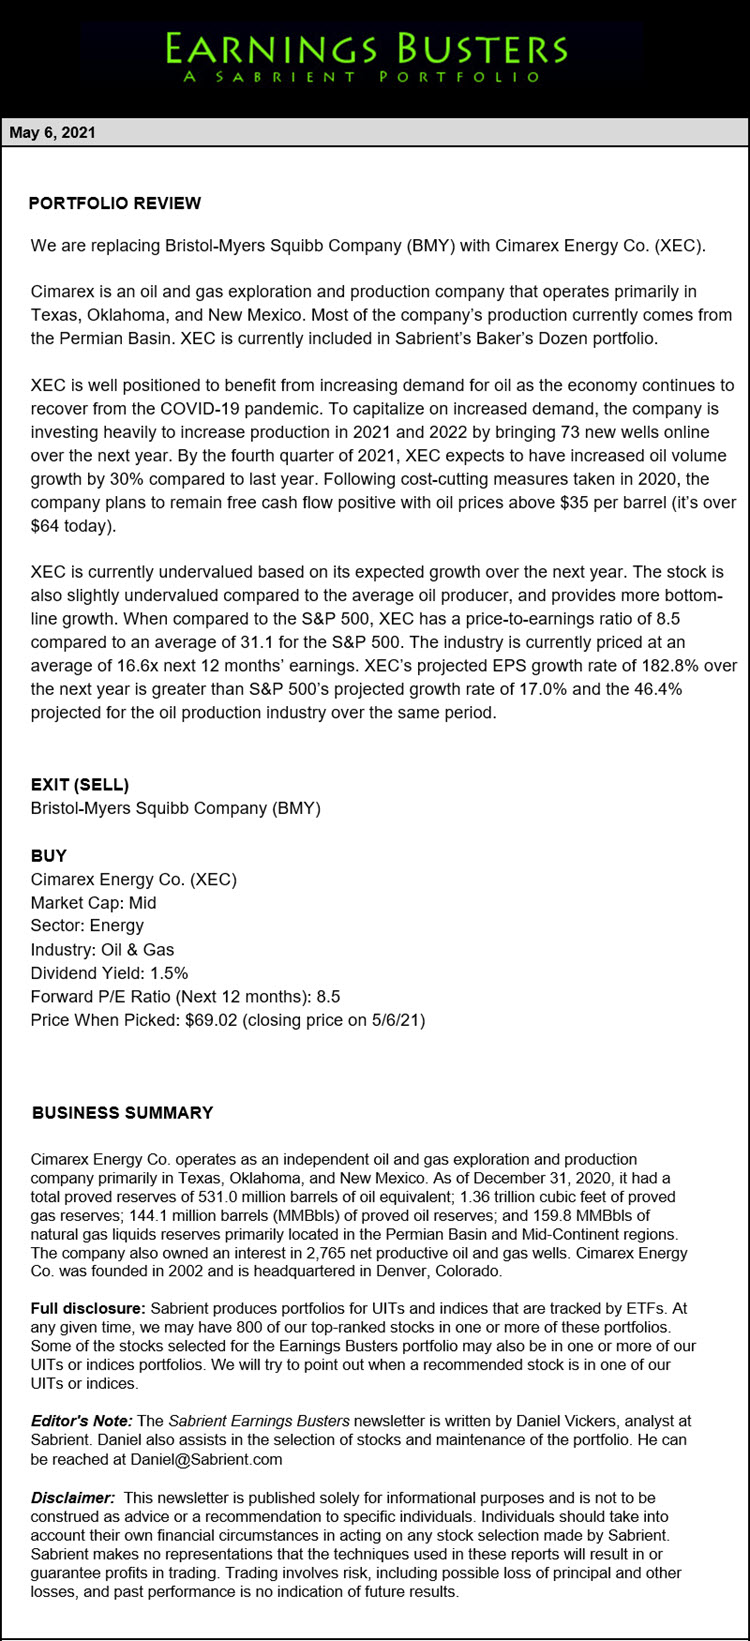 Earnings Busters Newsletter - May 6, 2021